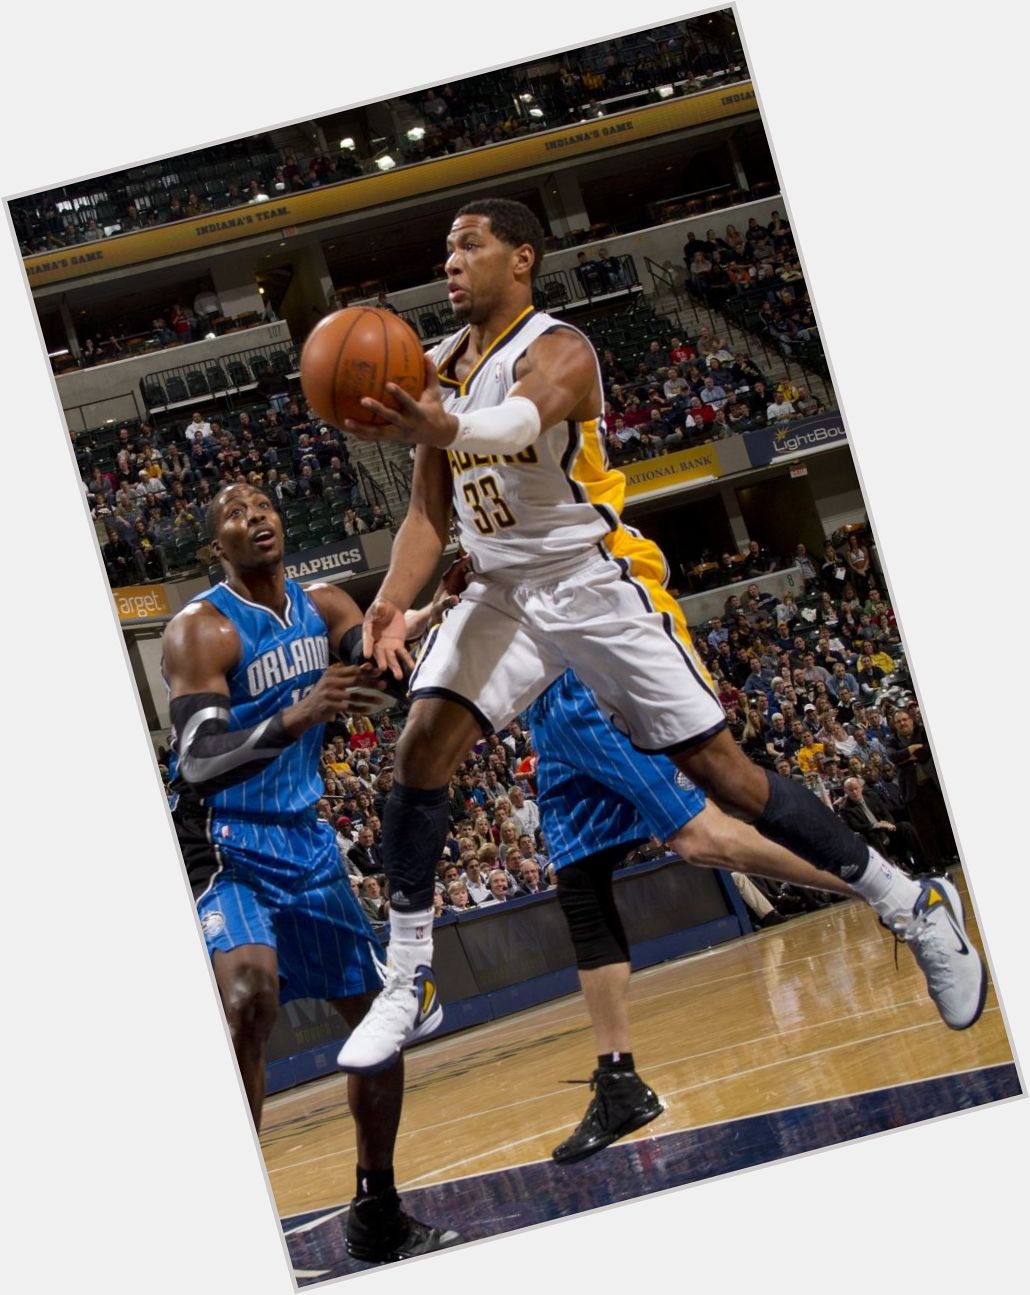 Happy Birthday Danny Granger!

NBA All-Star, Most Improved Player & Paul George\s mentor in Indiana. 